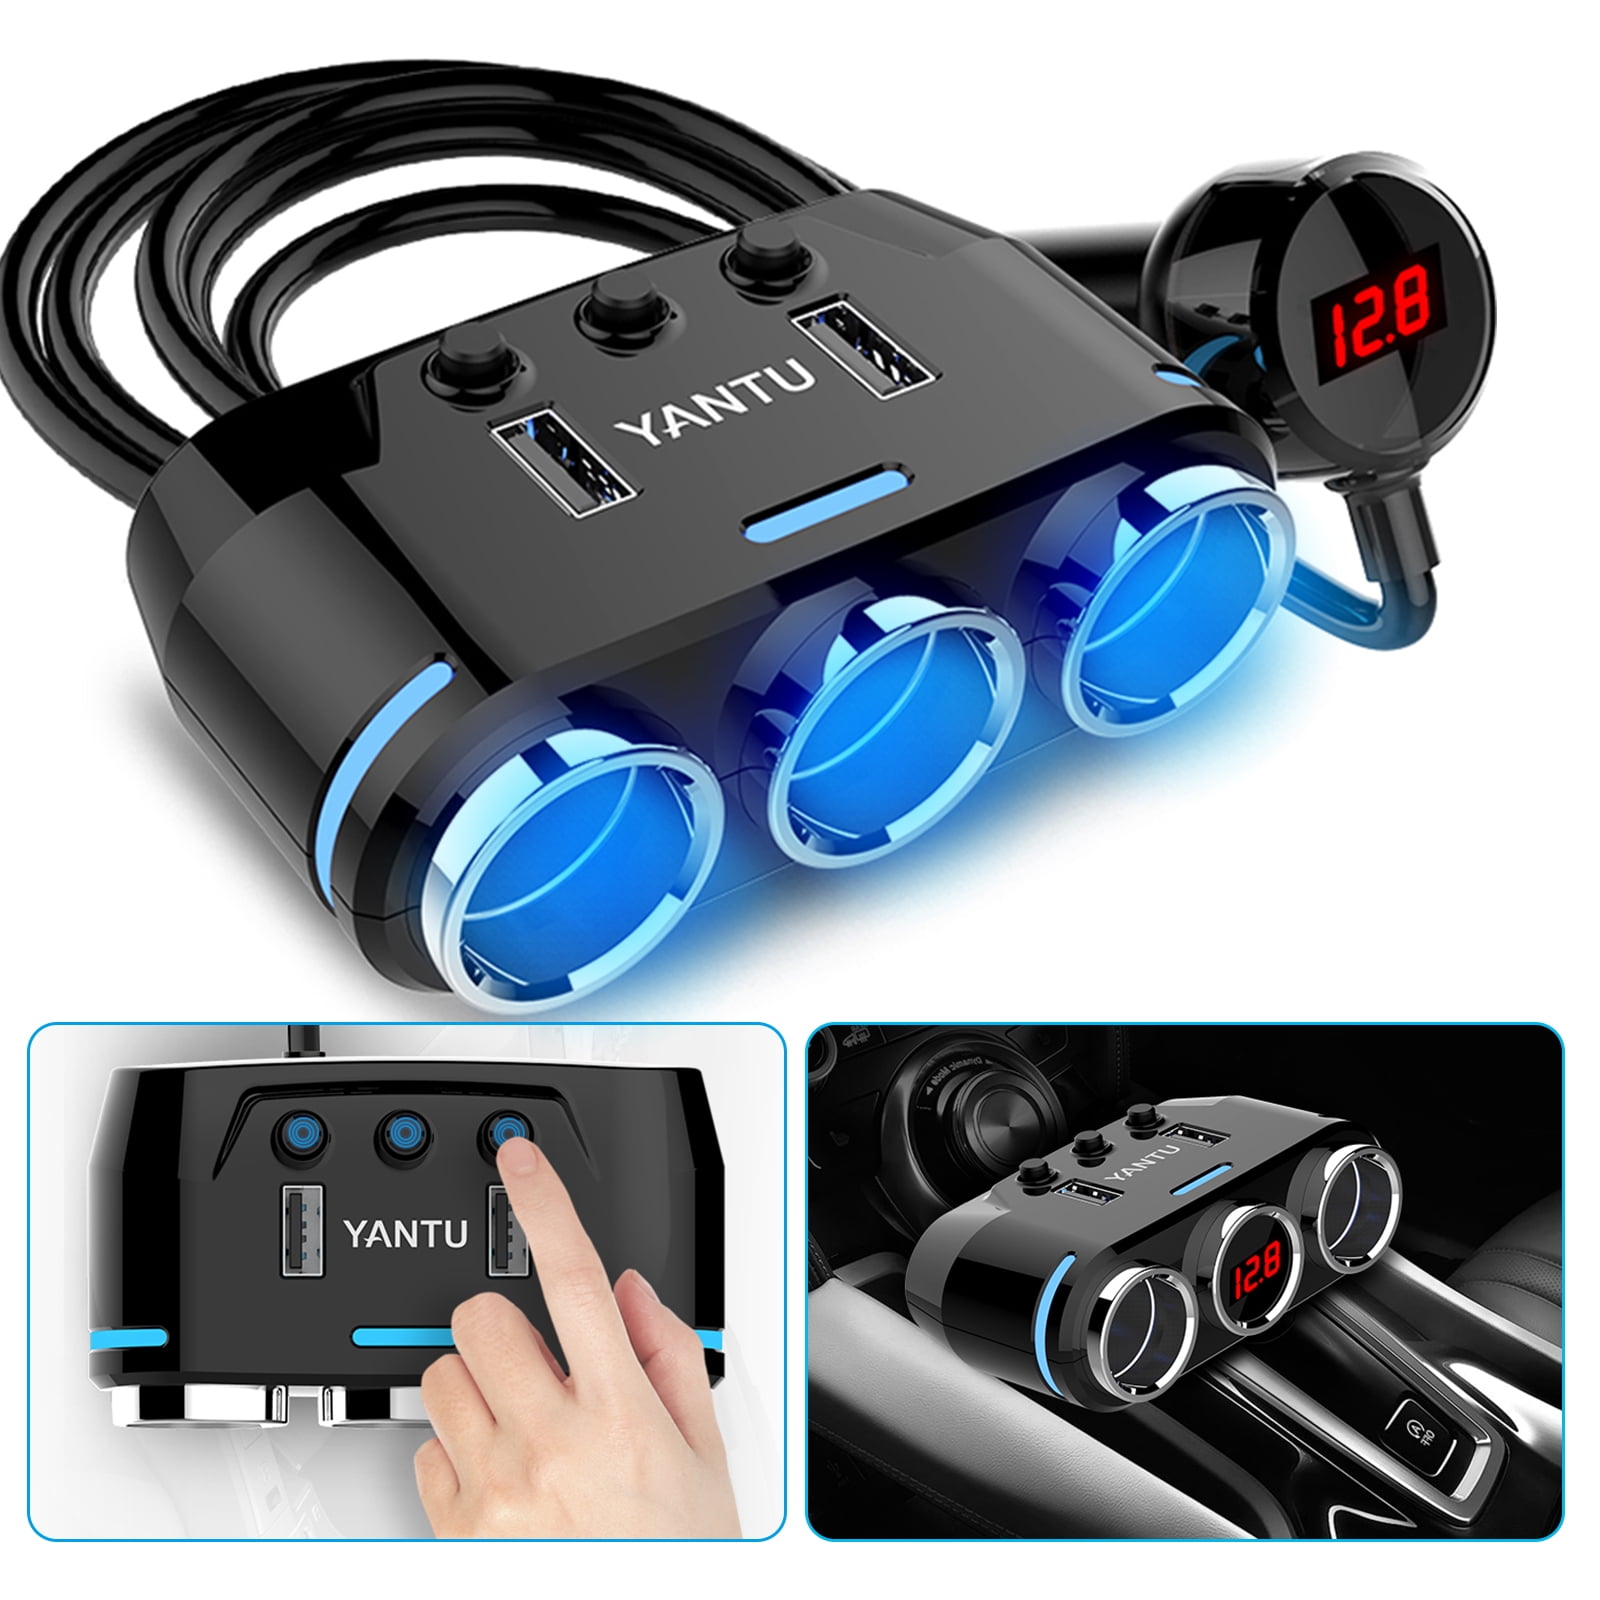 Cigarette Lighter Adapter, TSV QC 3.0 Cigarette Lighter Splitter, 3 Socket  Car Cigarette Lighter USB Charger 100W 12V/24V 3.1A for Dashcam Phone, Car  Splitter Adapter with Switches, Voltage Readout 